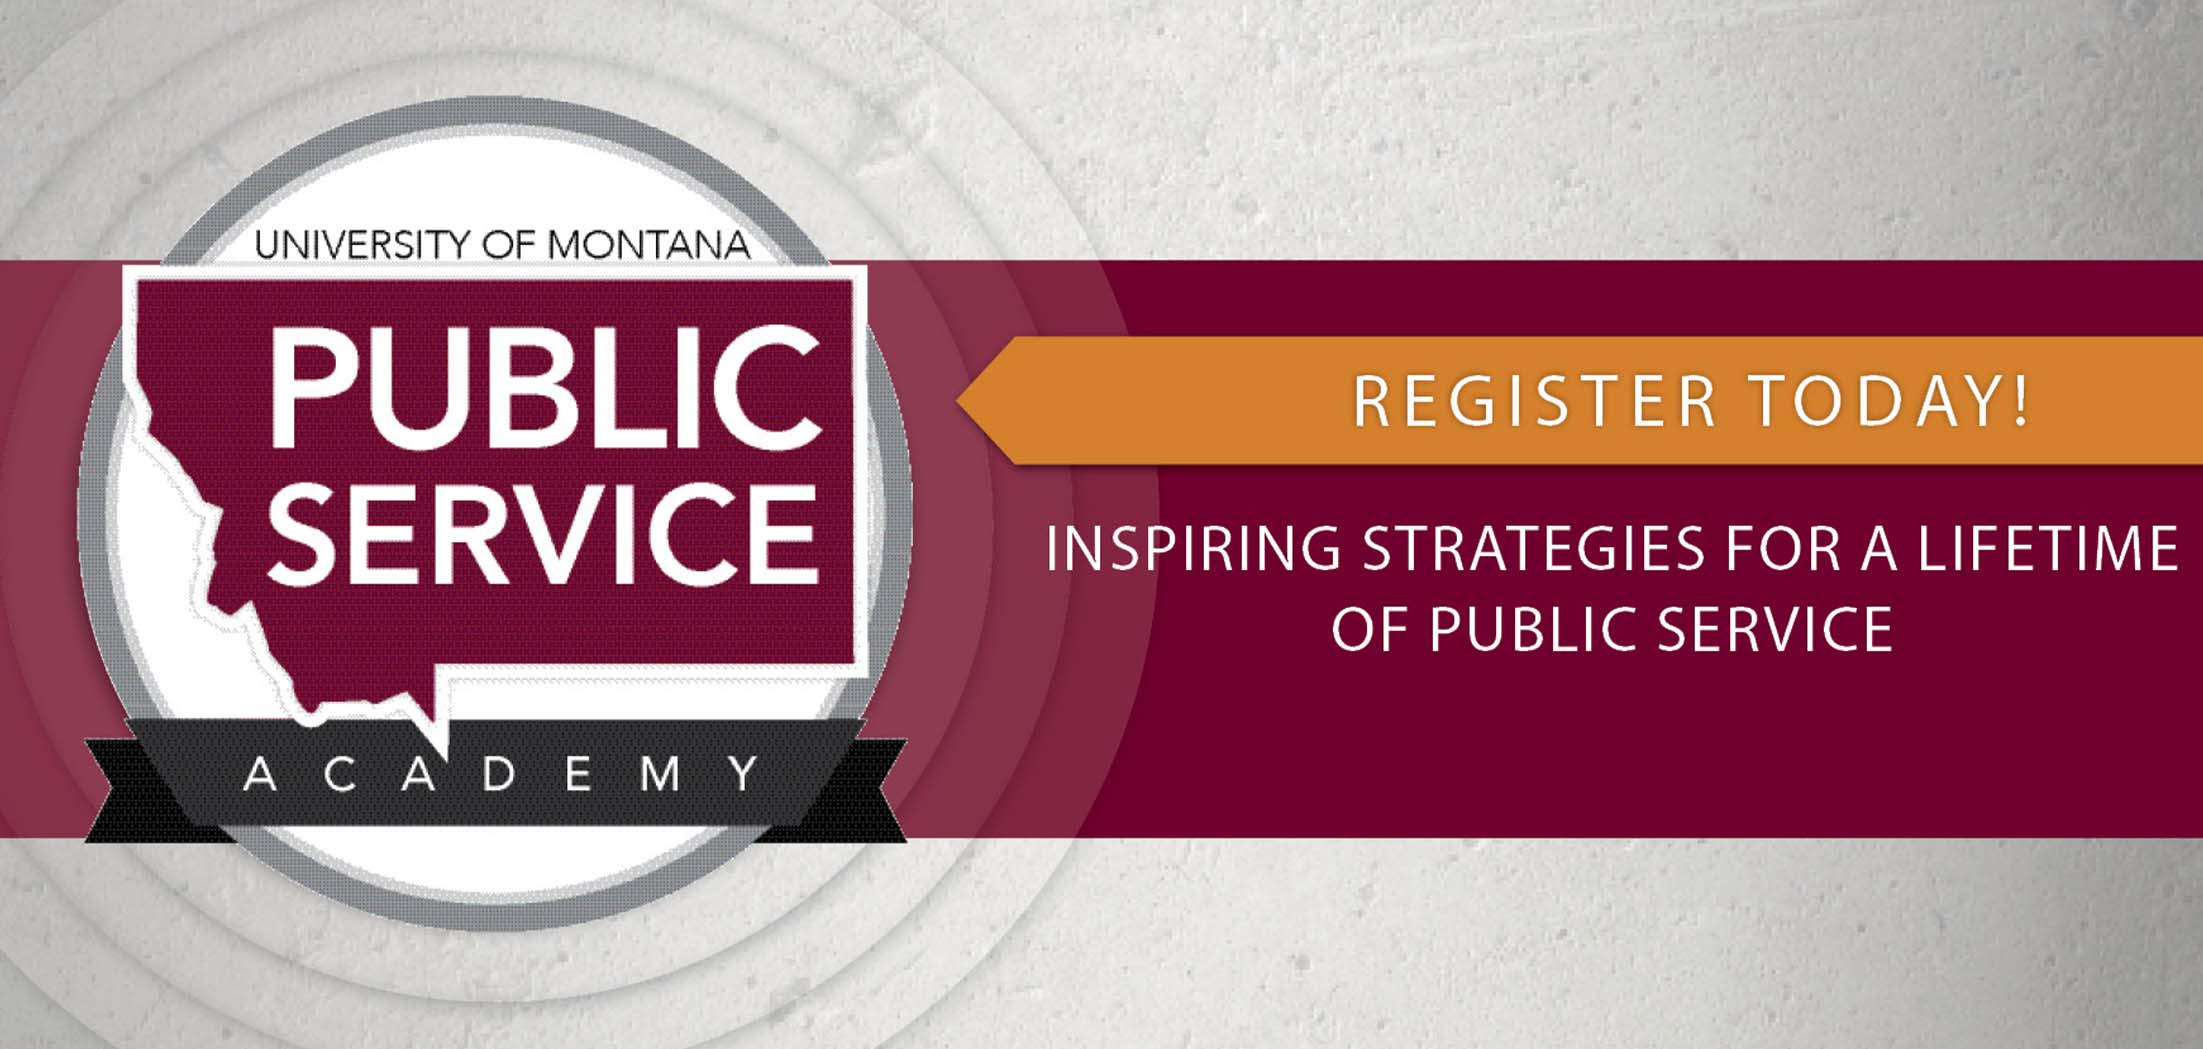 University of Montana Public Service Academy Register Today! Inspiring Strategies for a Lifetime of Public Service